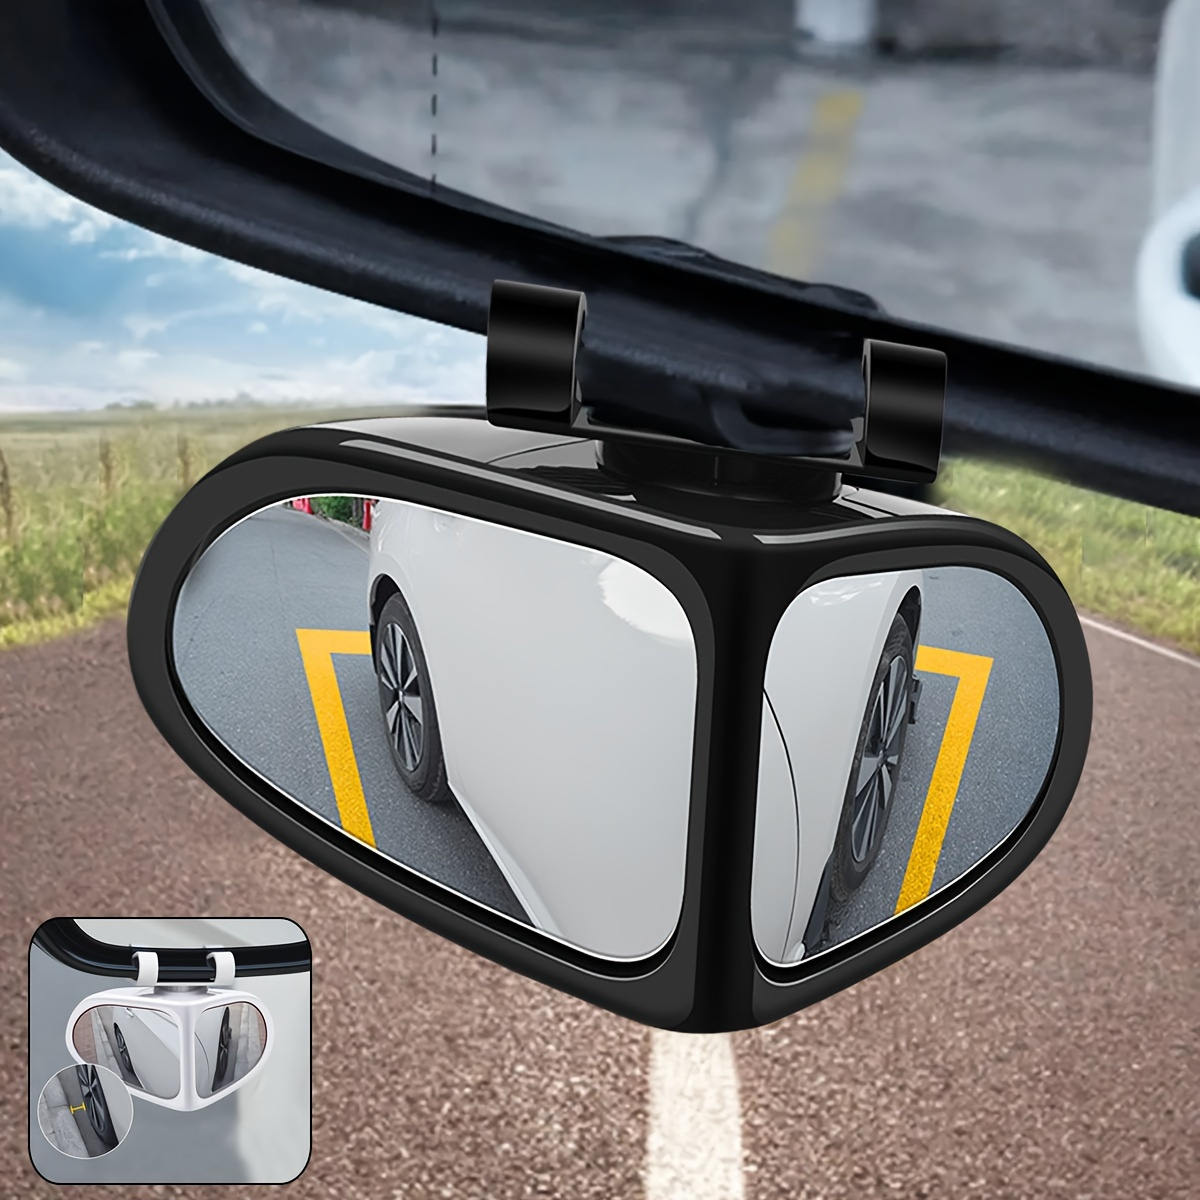 

2-piece Hd Wide-angle Blind Spot Mirrors For Cars - 360° Adjustable, Fit, Triangle Design